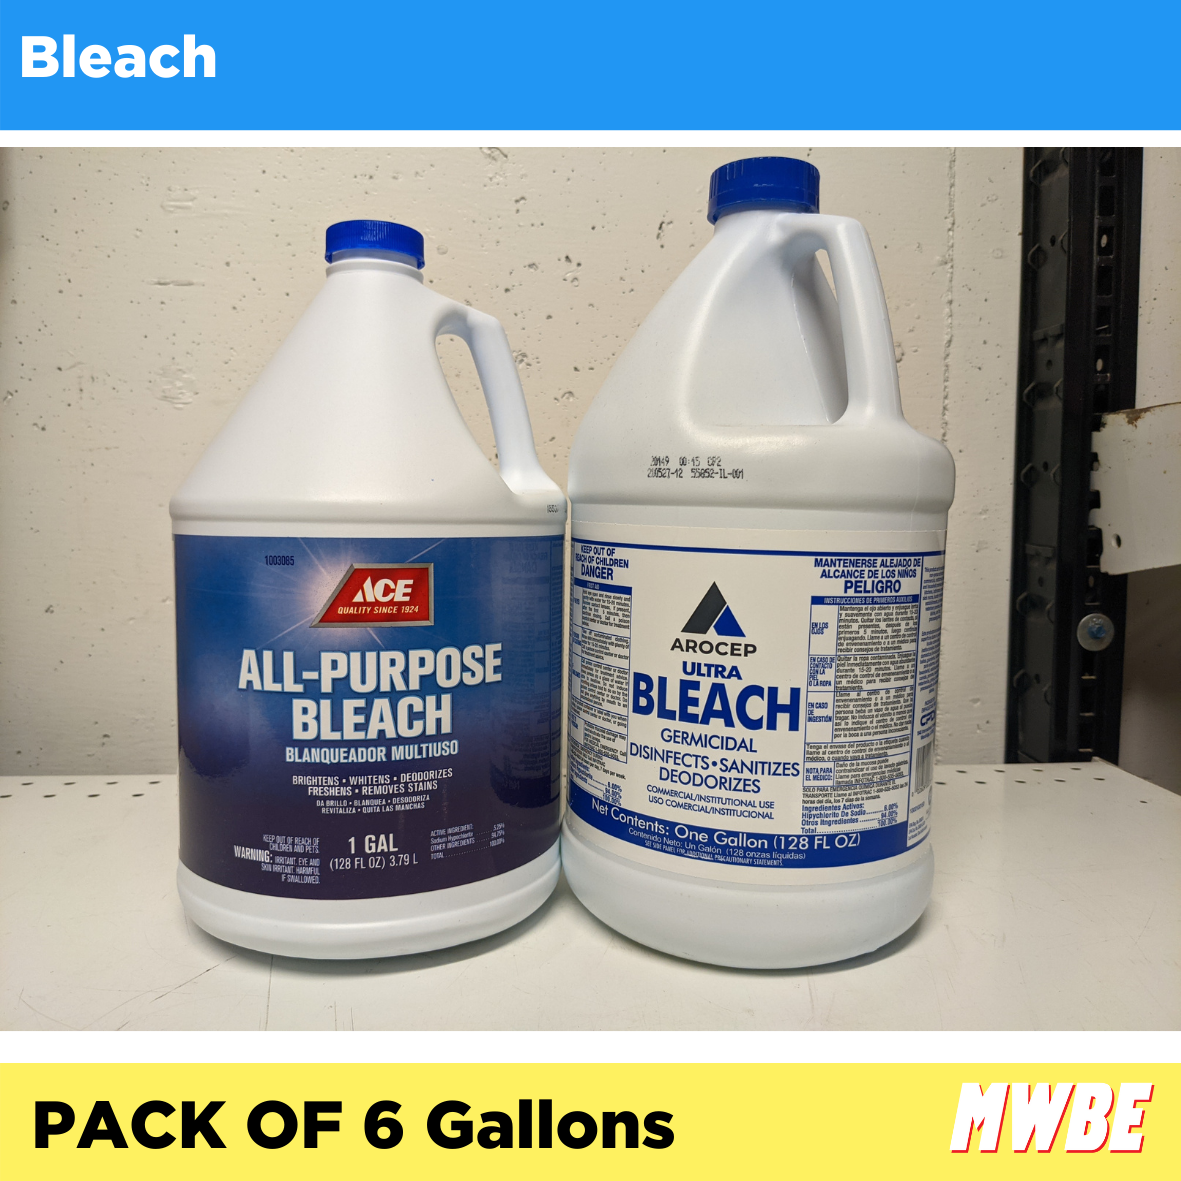 MWBE - Bleach - Pack of 6 Gallons (Listing ID: 6617455362117)